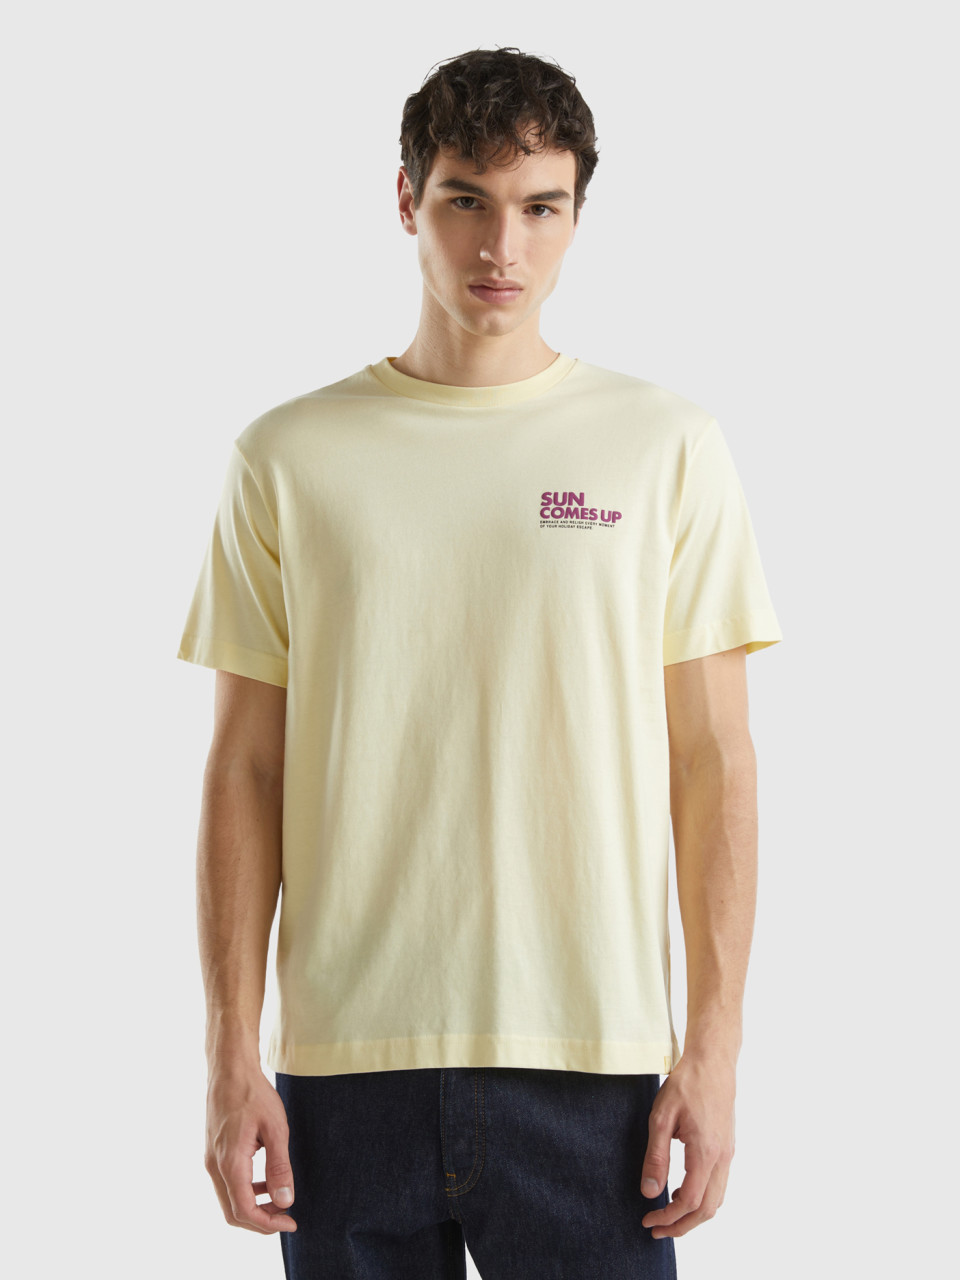 Benetton, T-shirt With Print On Front And Back, Yellow, Men